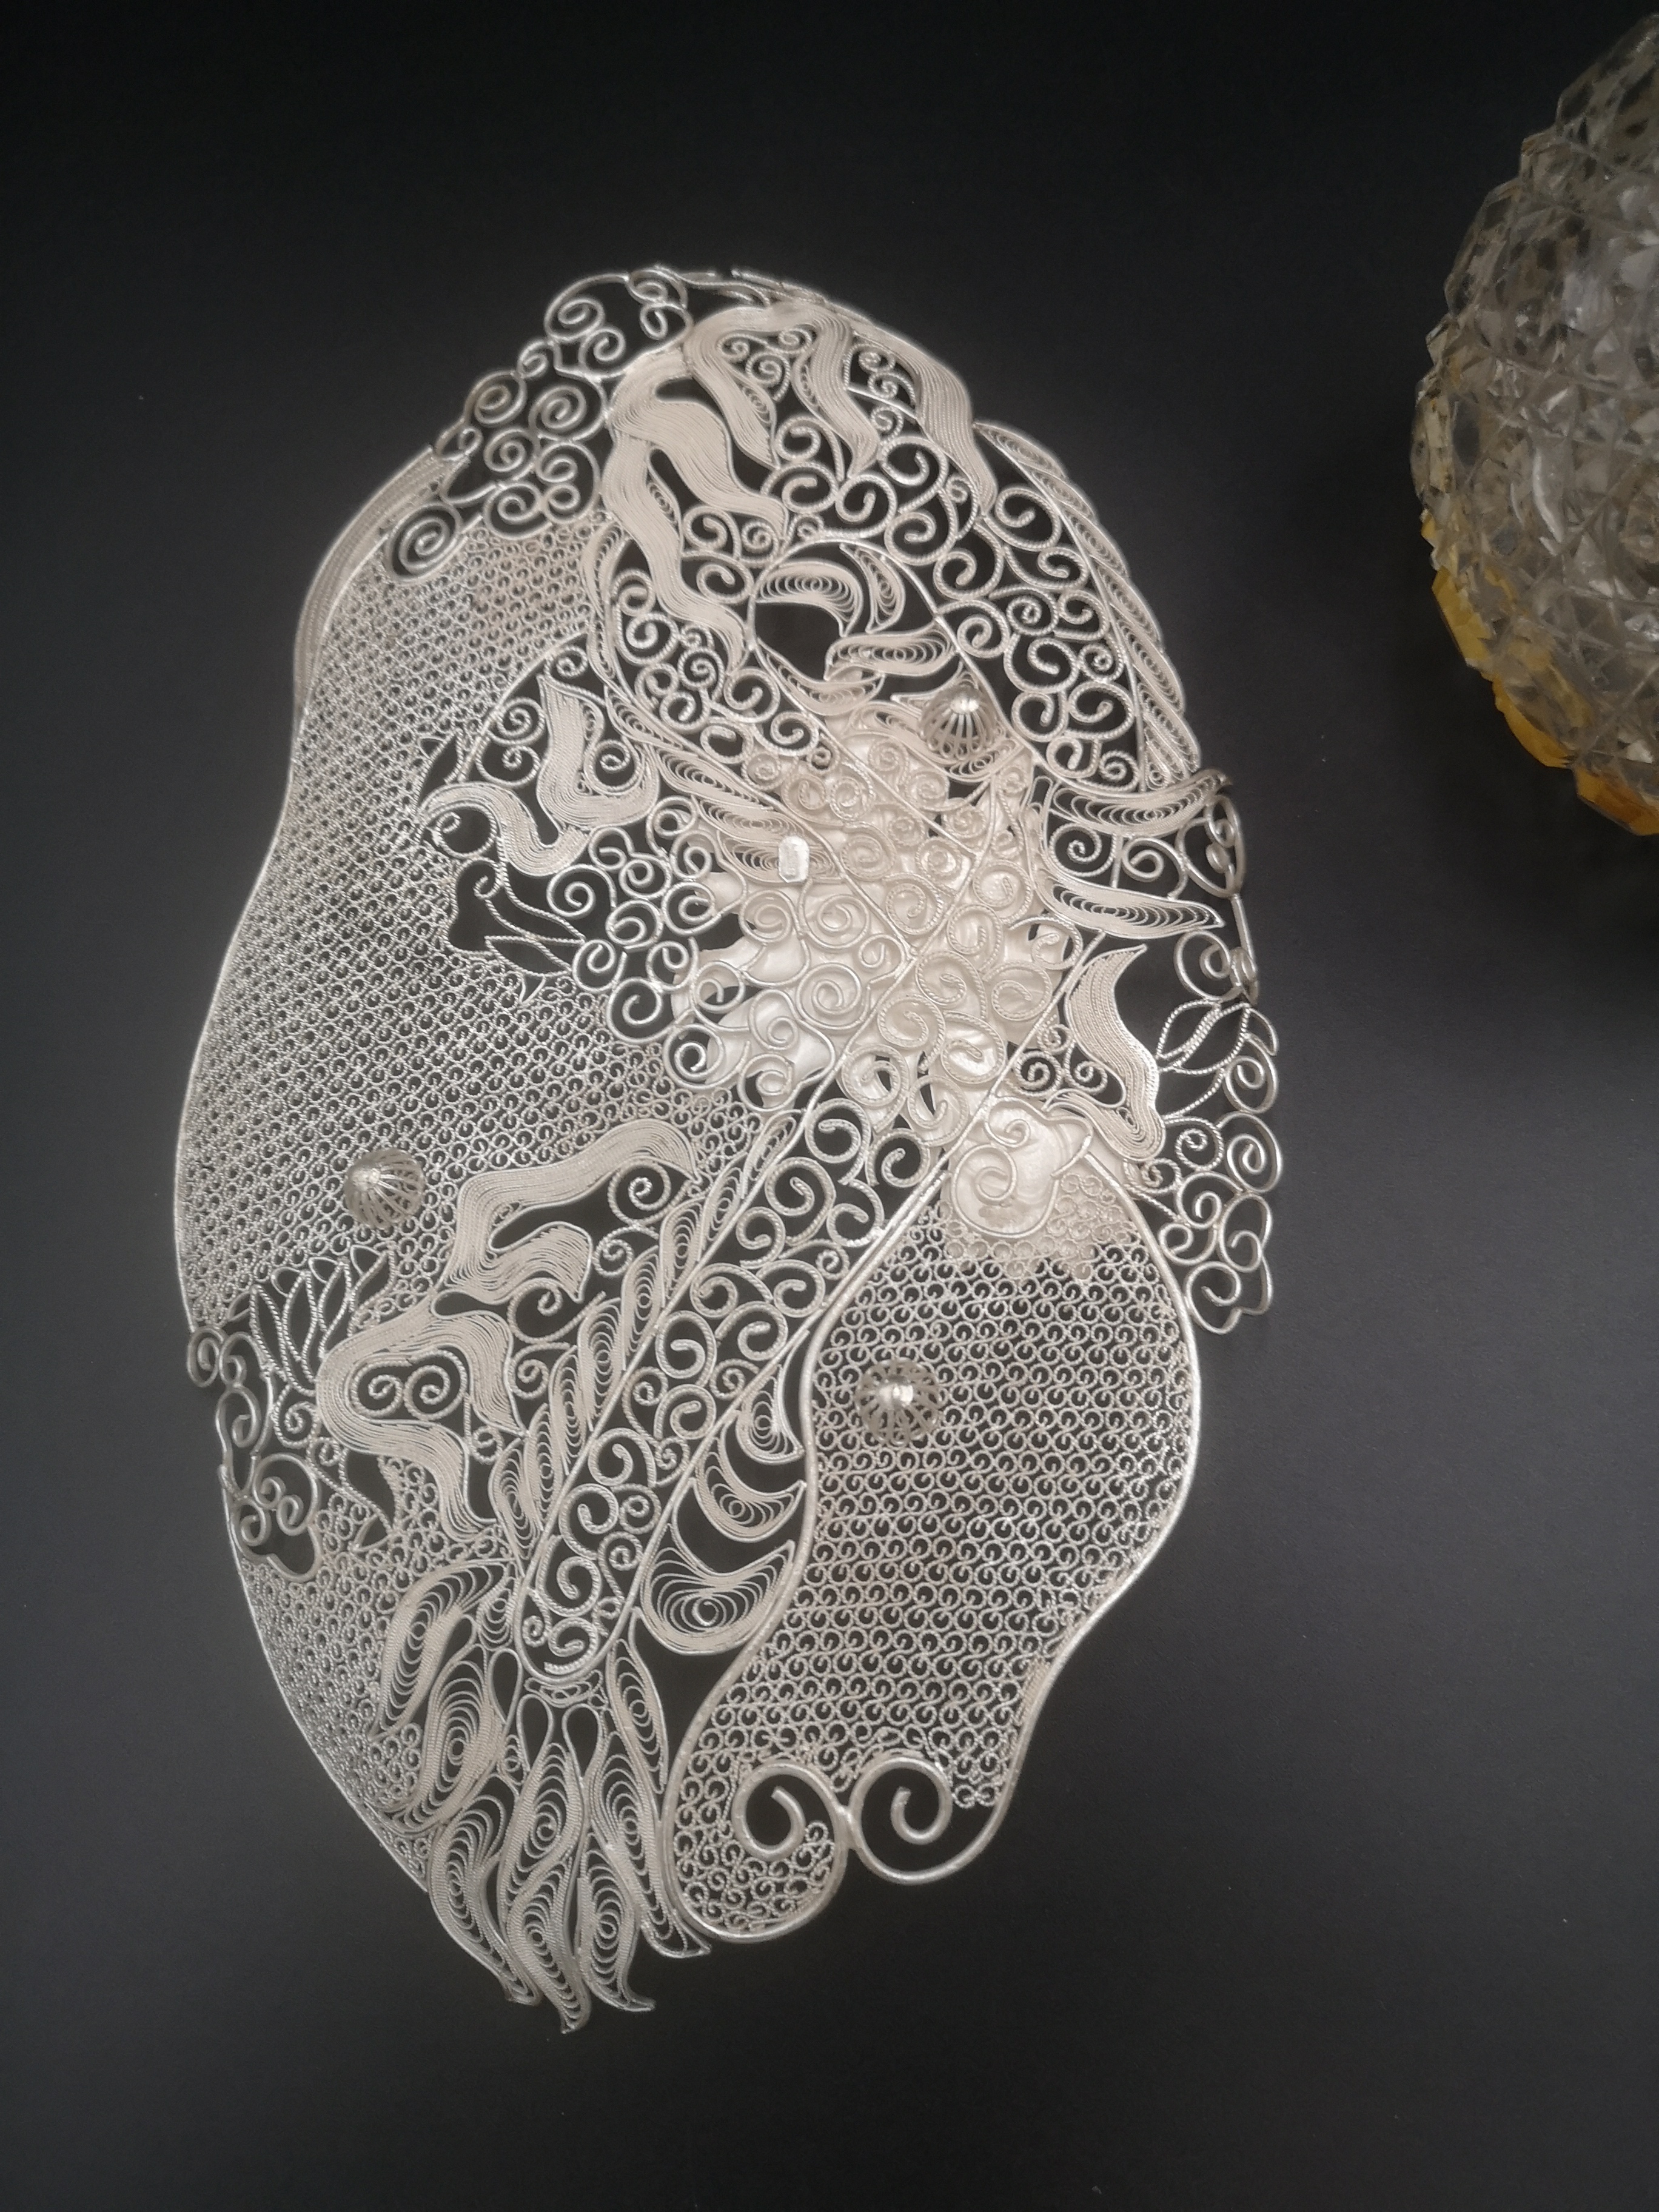 Cut glass perfume bottle together with a white metal filigree tray - Image 4 of 5